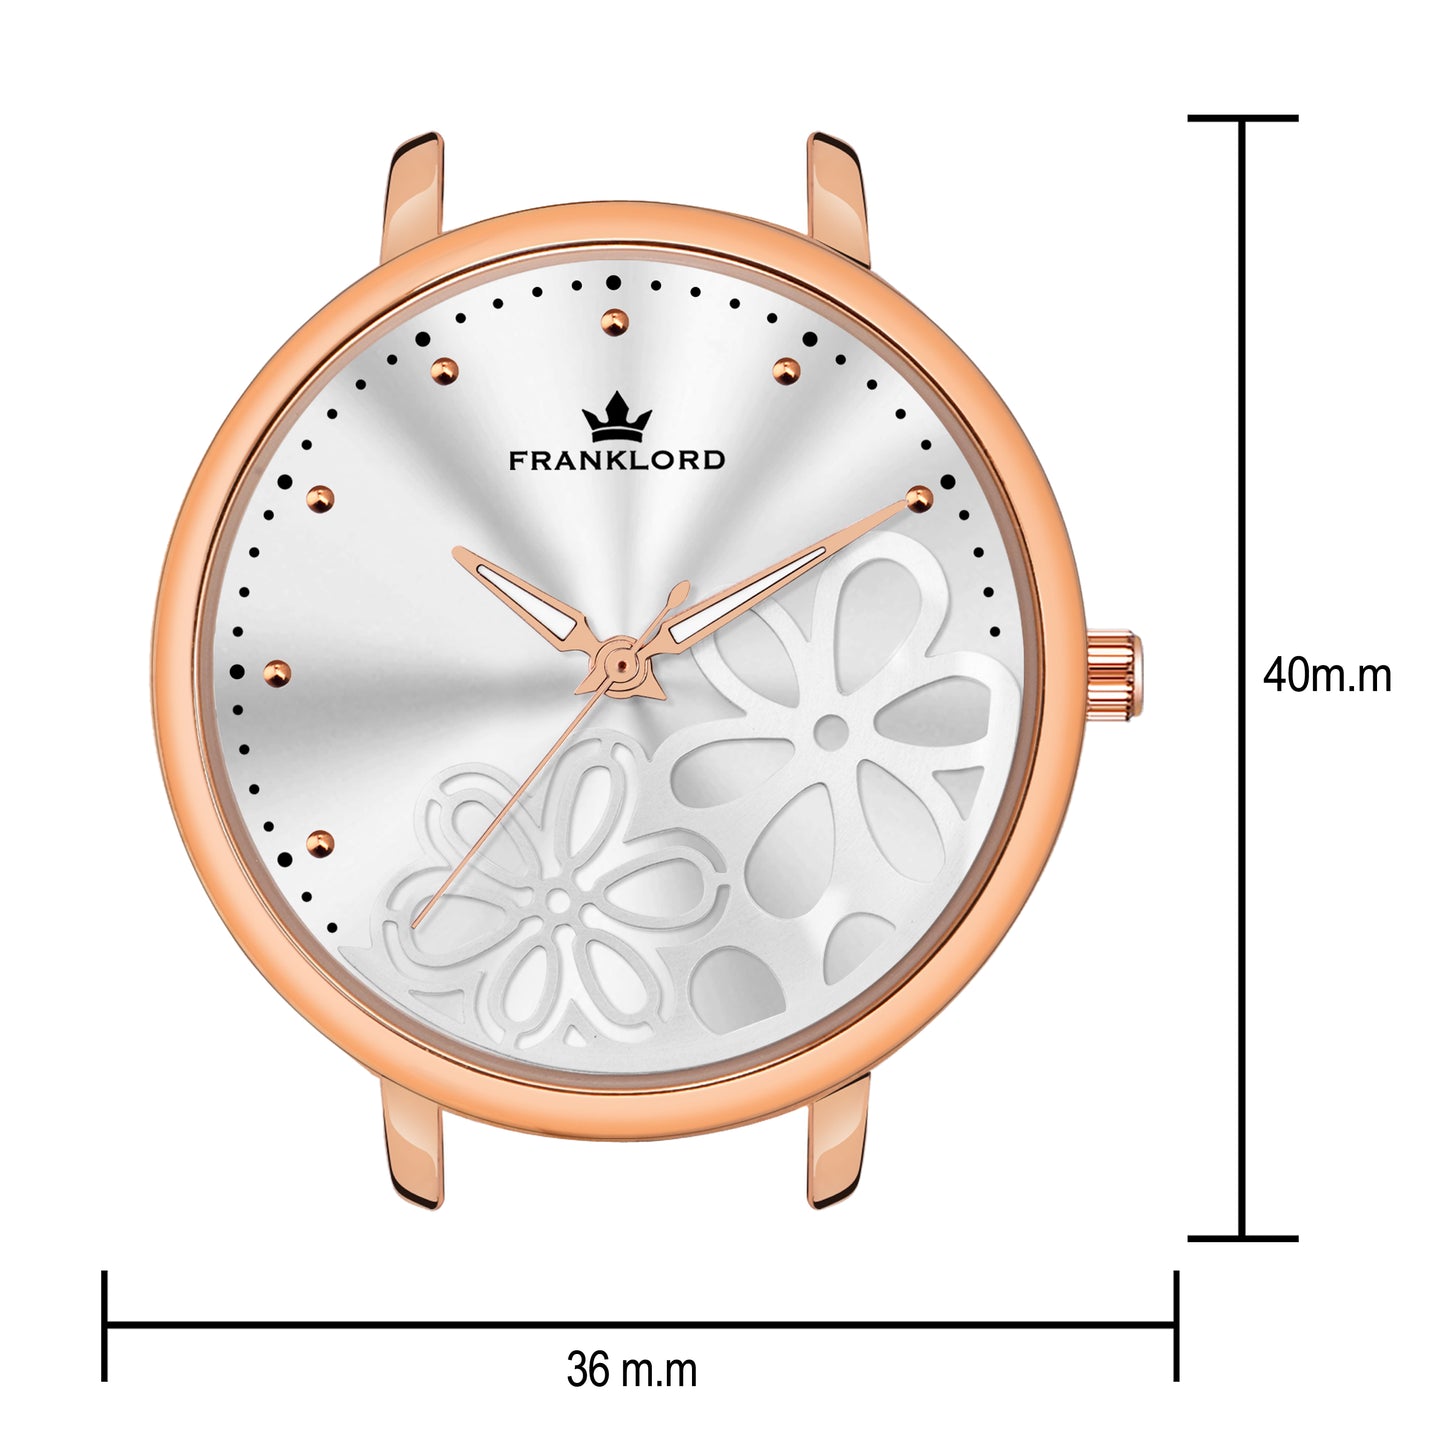 THE FLORA -White Dial & Rose Gold Strap - Graceful Movement Wrist Watch Designed For Women  F-133 SRL